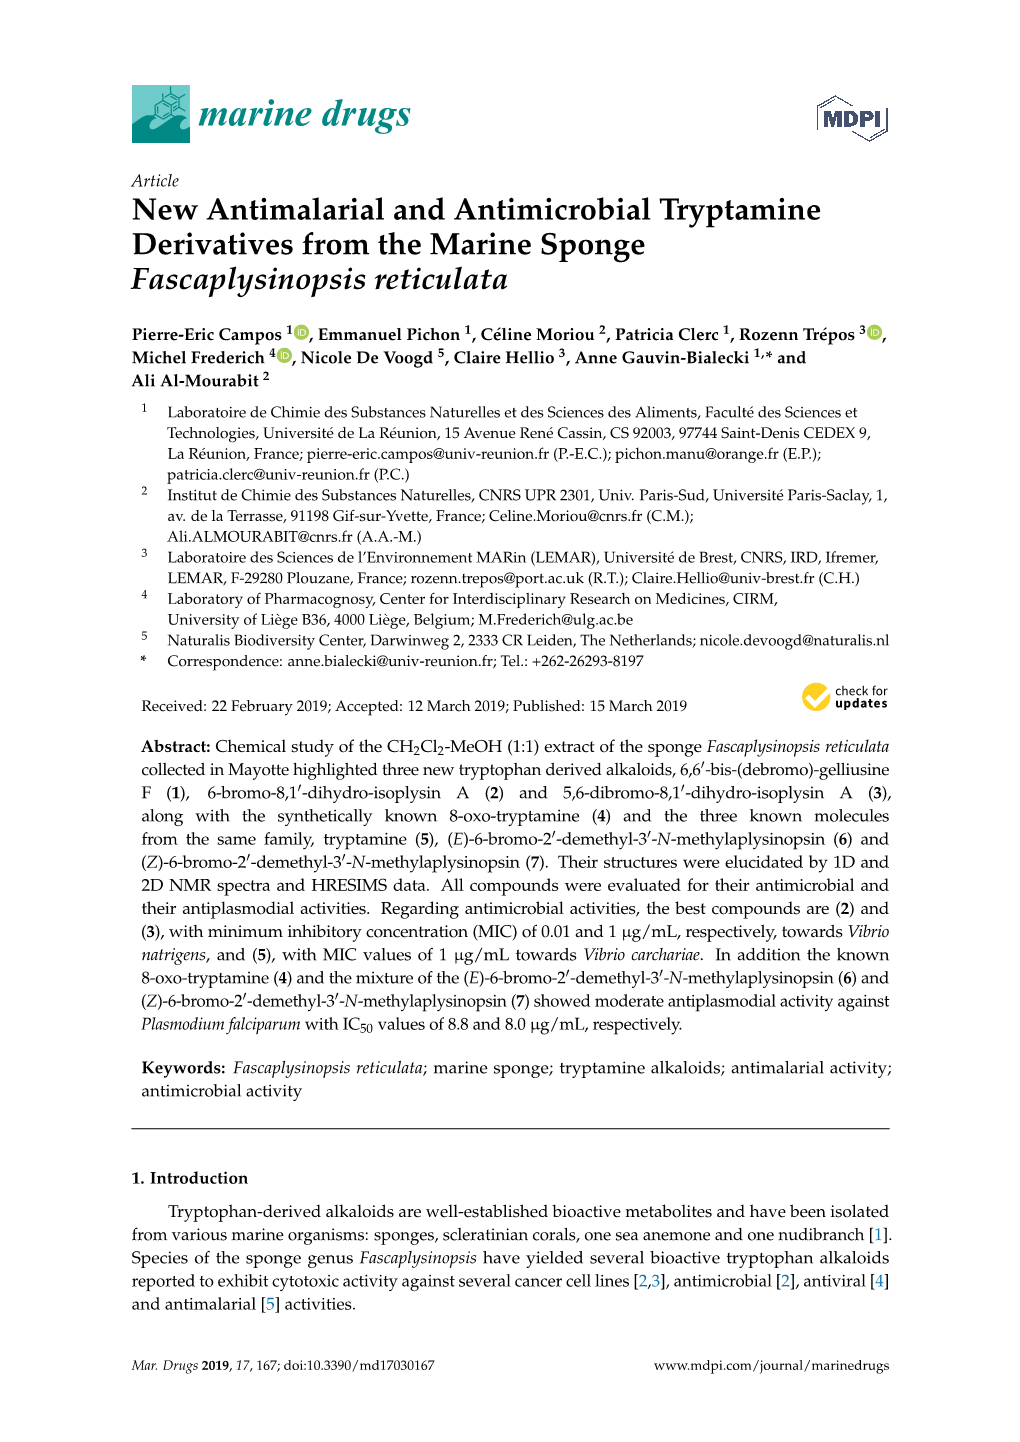 New Antimalarial and Antimicrobial Tryptamine Derivatives from the Marine Sponge Fascaplysinopsis Reticulata